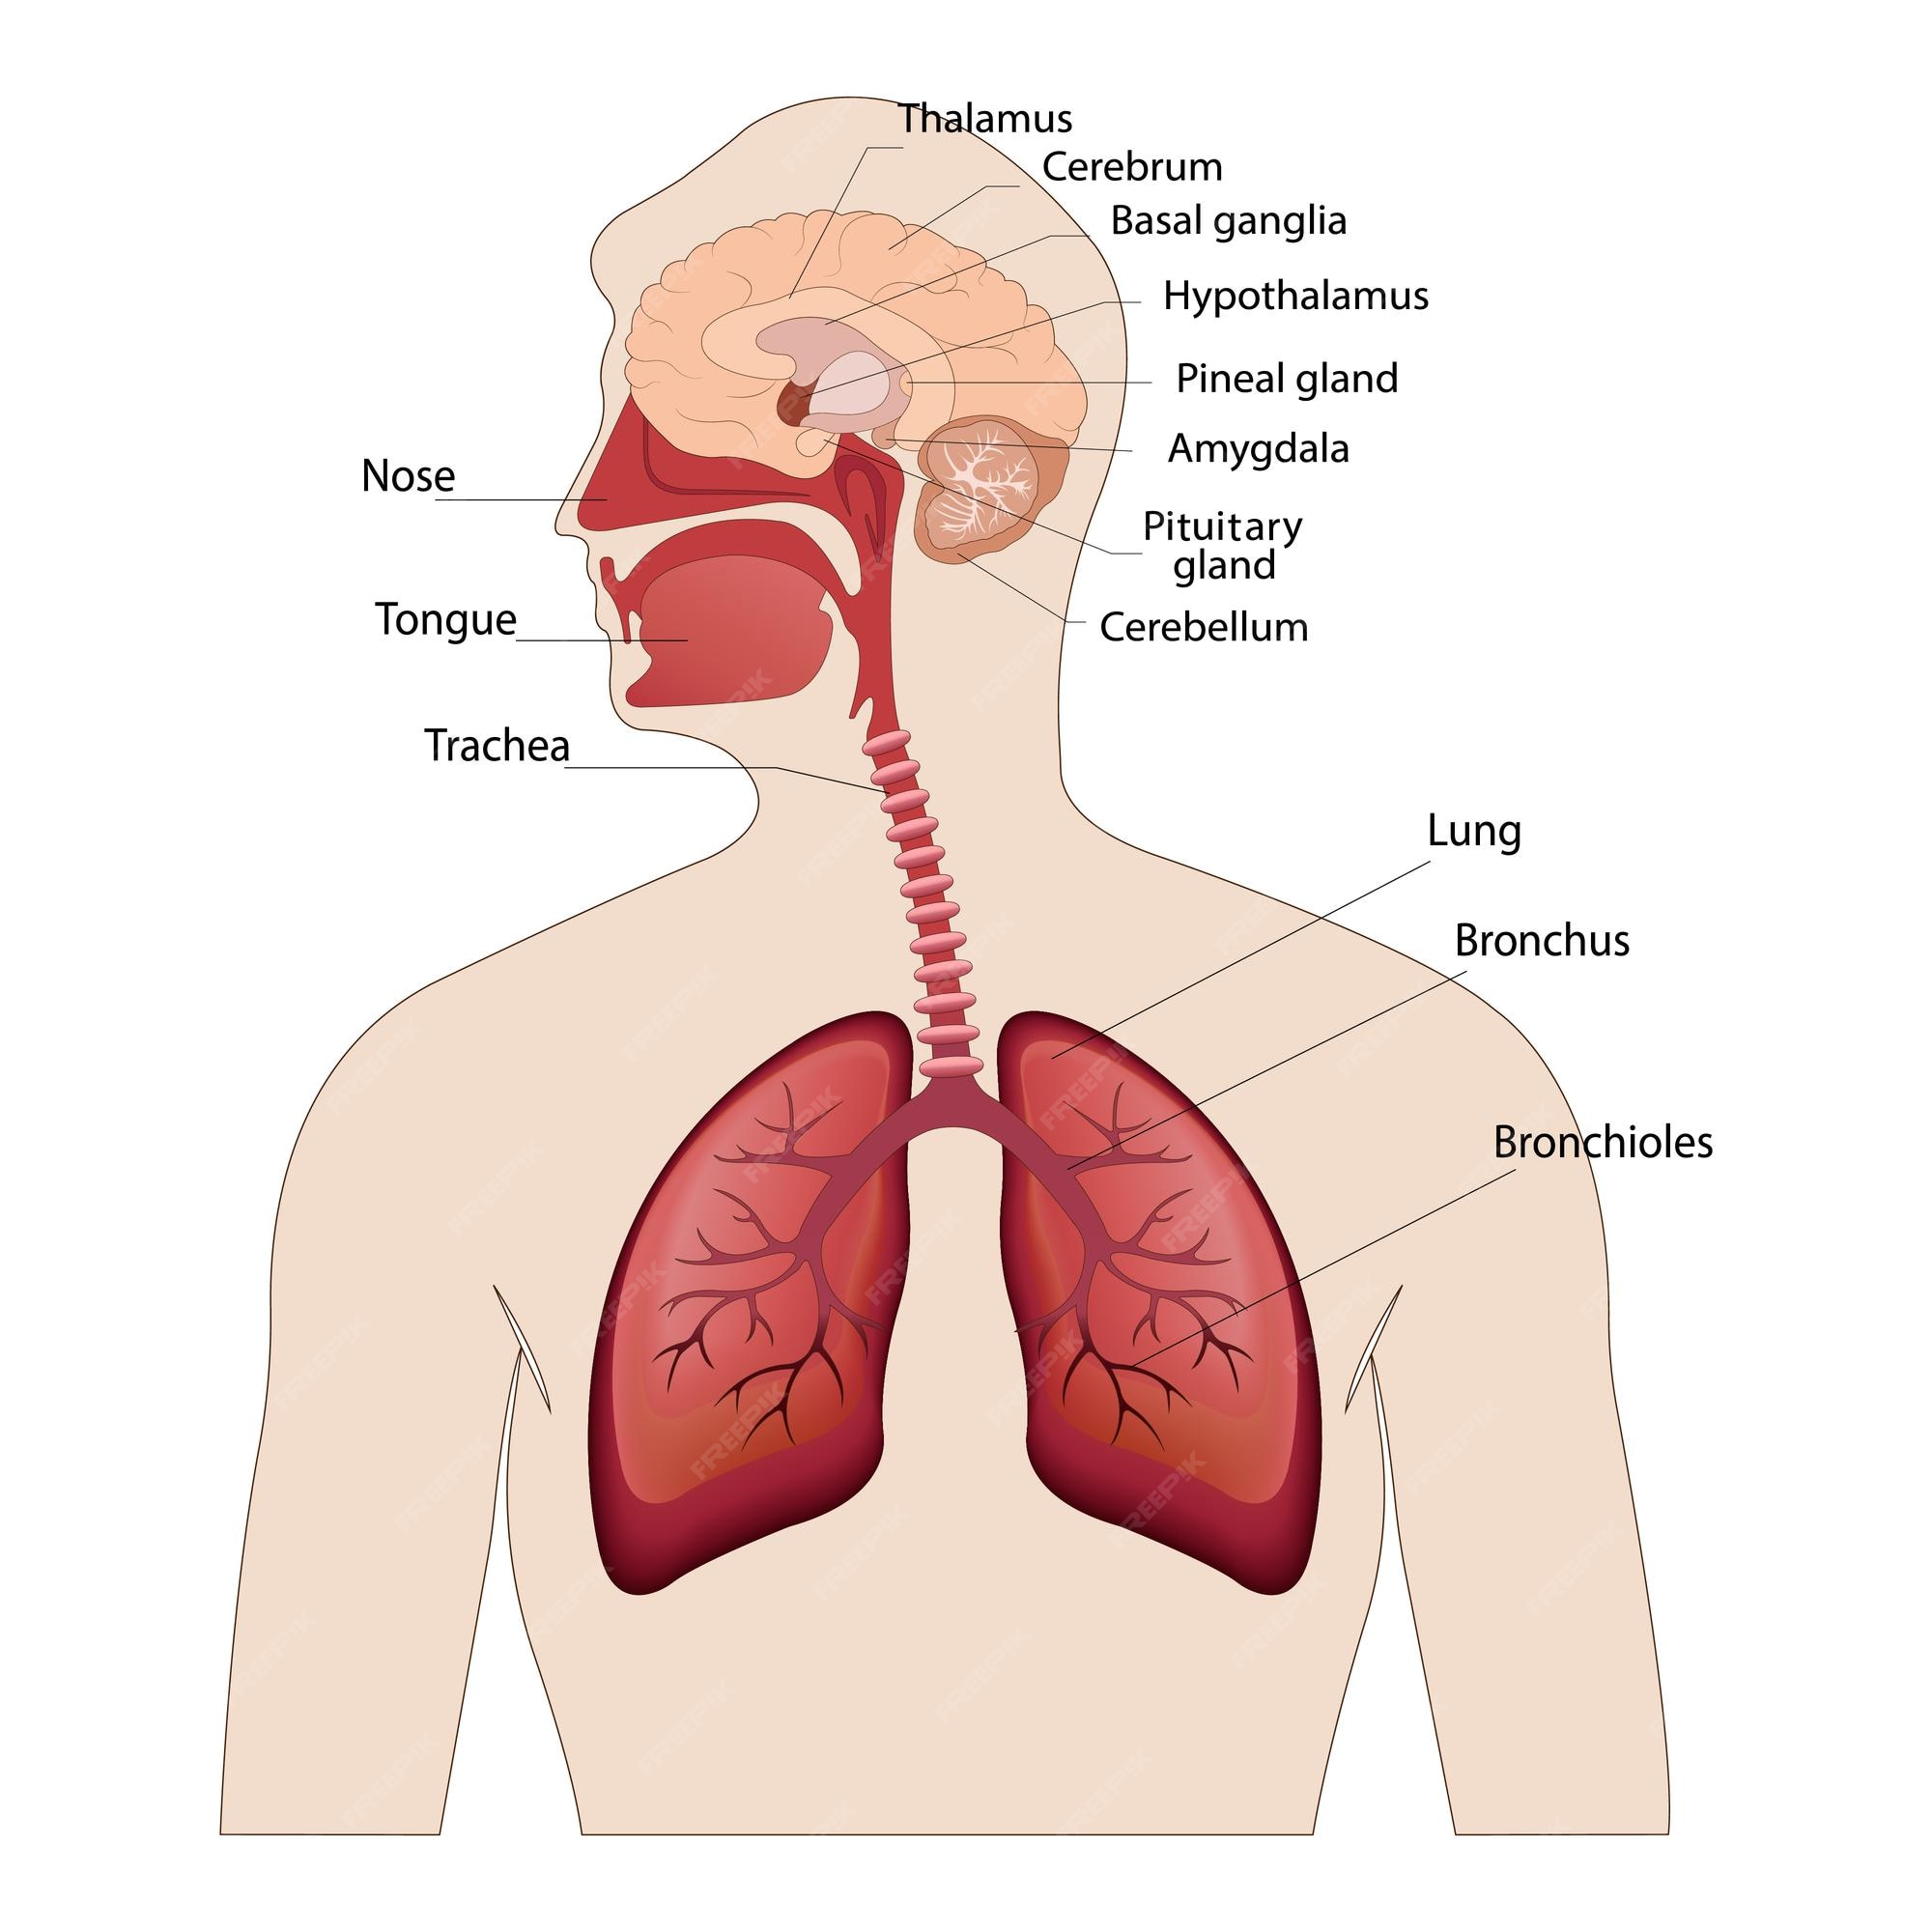 Premium Vector | Image Of The Anatomy Of The Lungs And Brain The Location  Of The Internal Organs Of The Human Body.